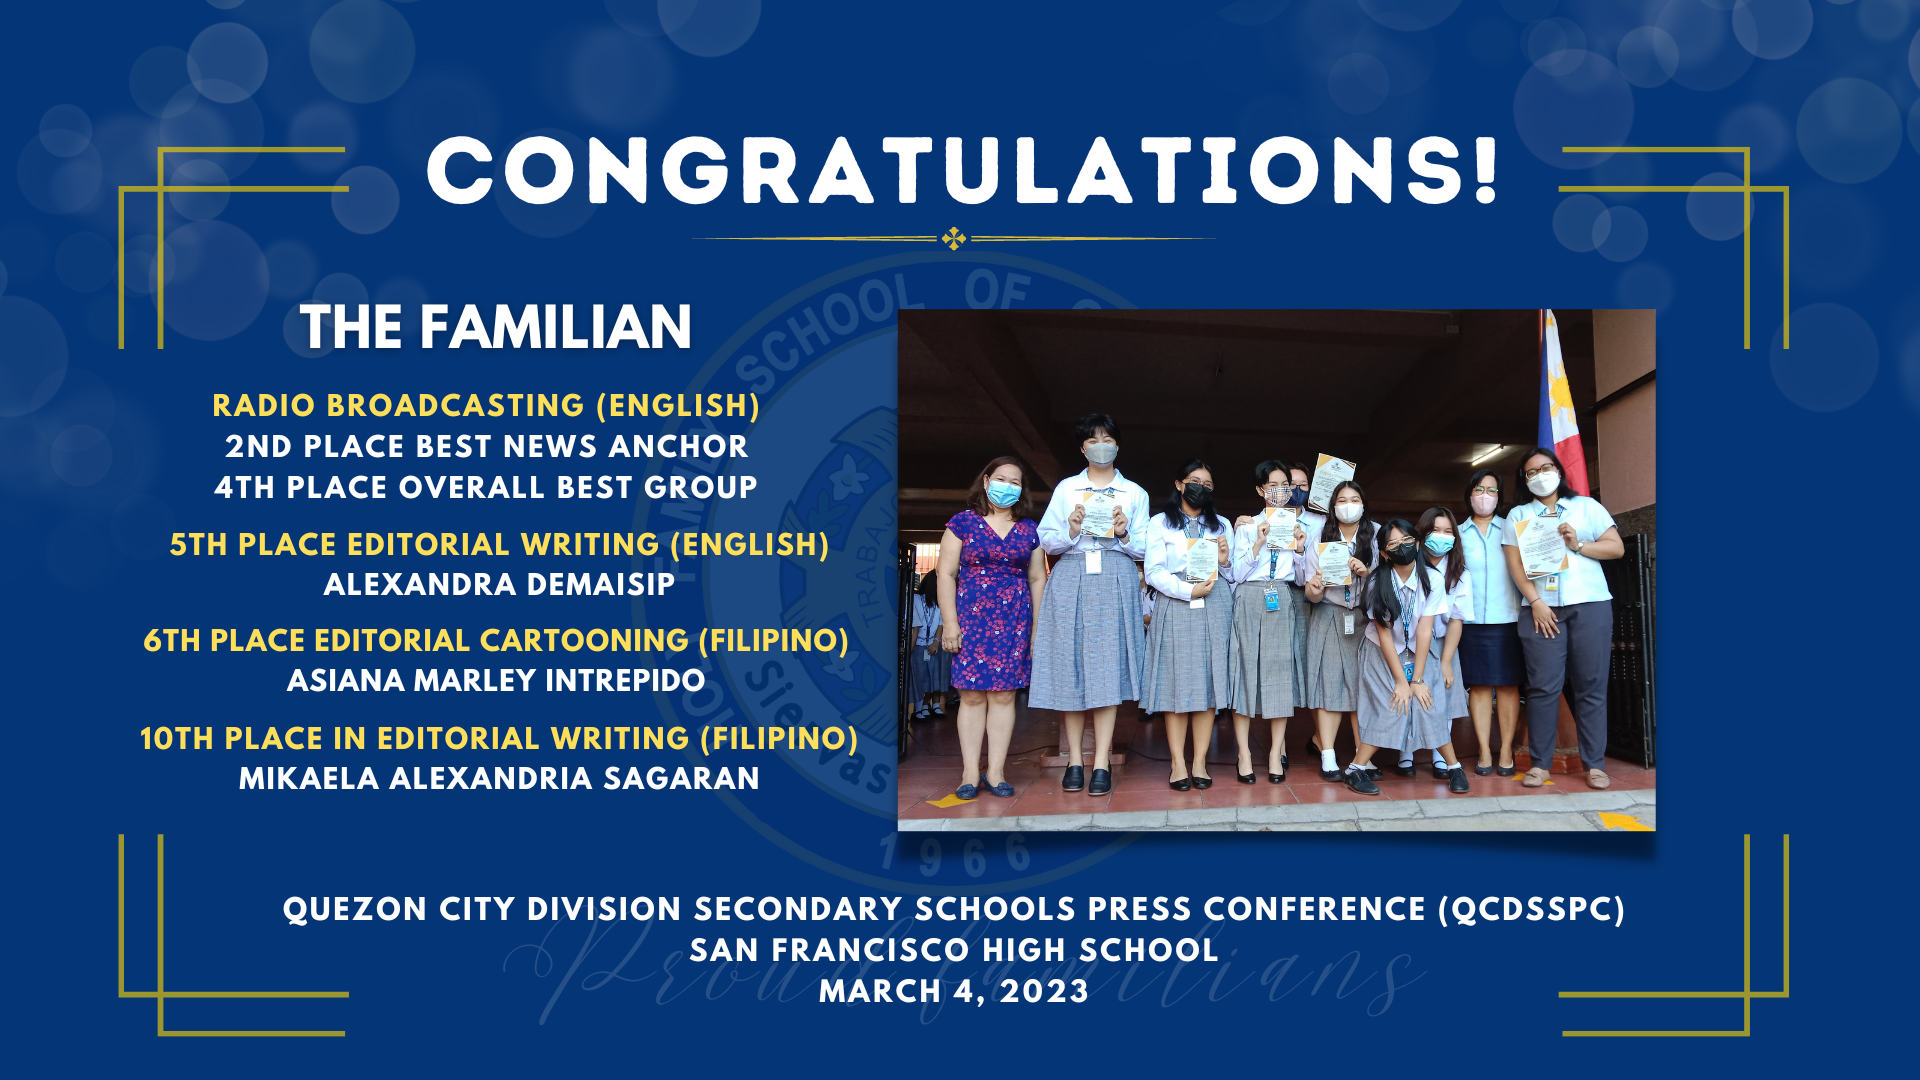 THE FAMILIAN bagged several awards at the recently concluded Quezon City Division Secondary Schools Press Conference